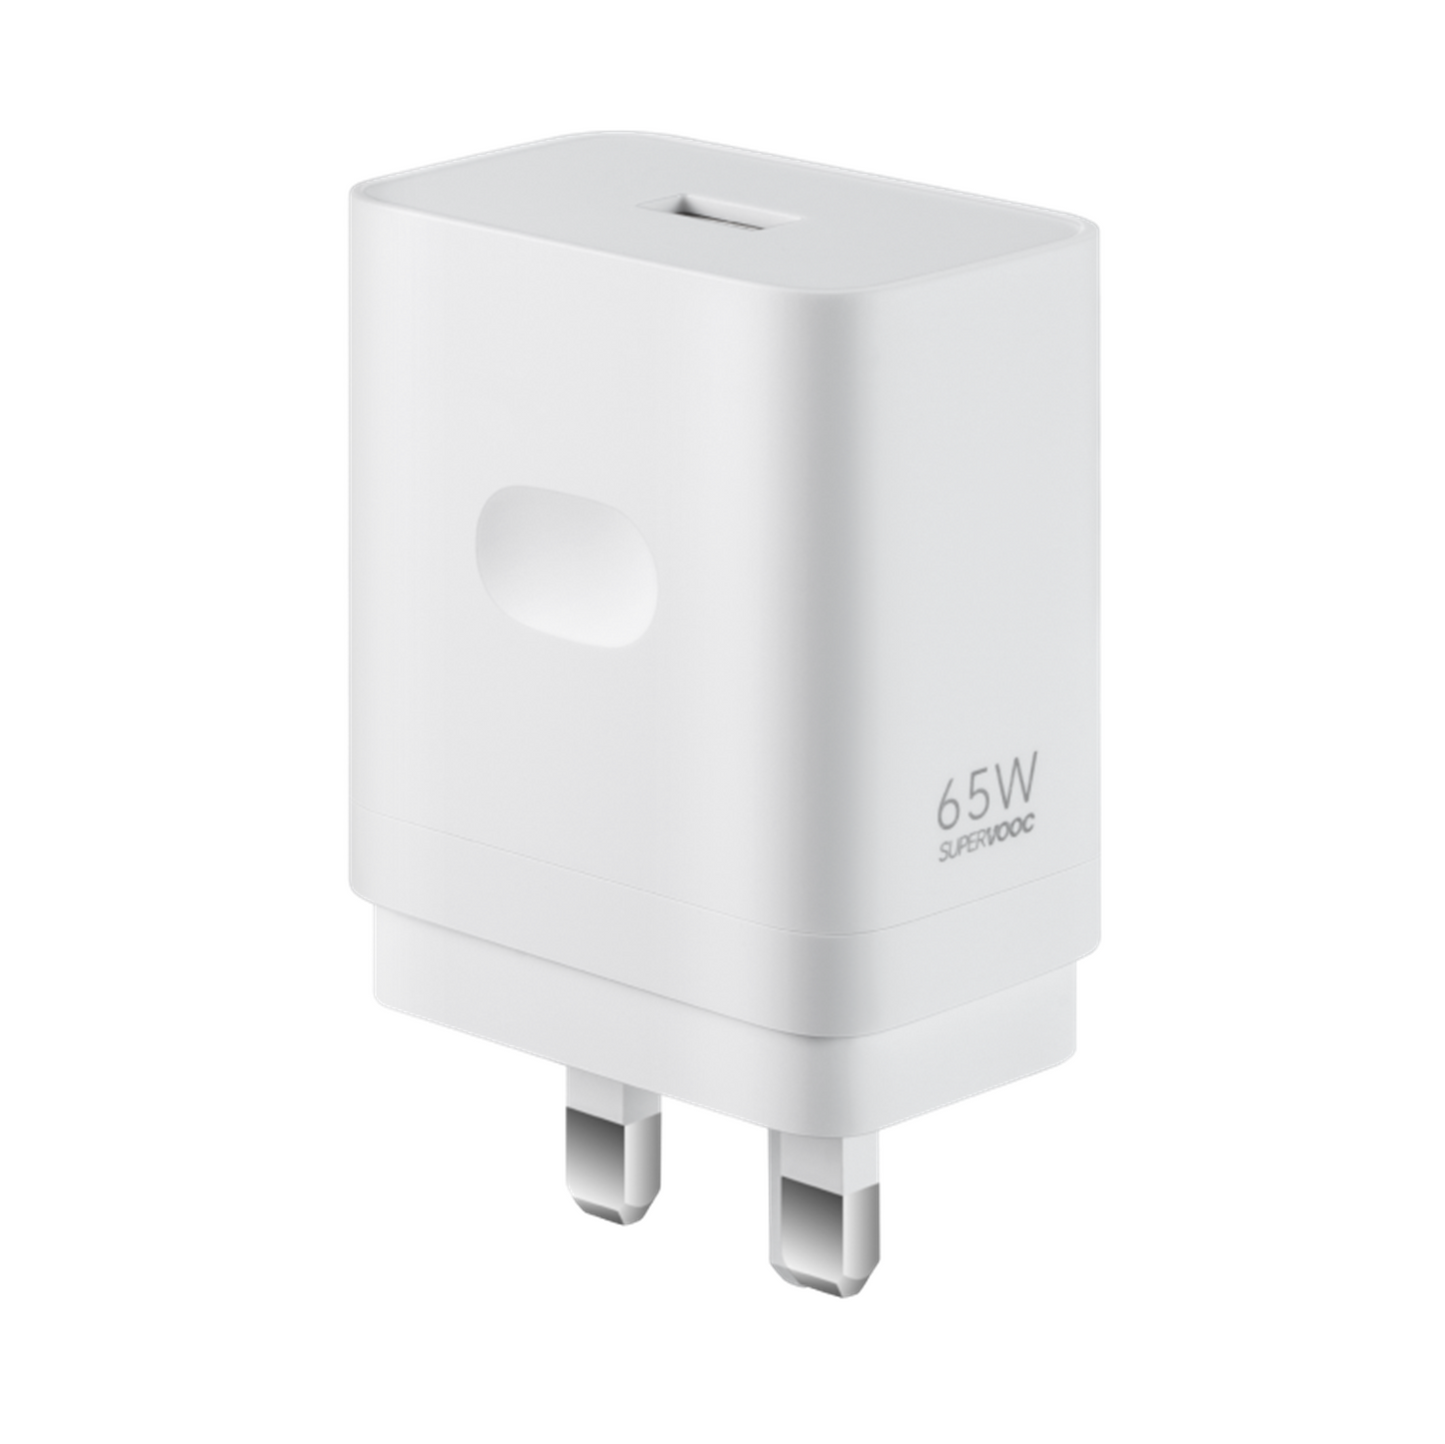 OnePlus SUPERVOOC 65W Power Adapter Type-A USB-A 6.5A Charger UK Plug